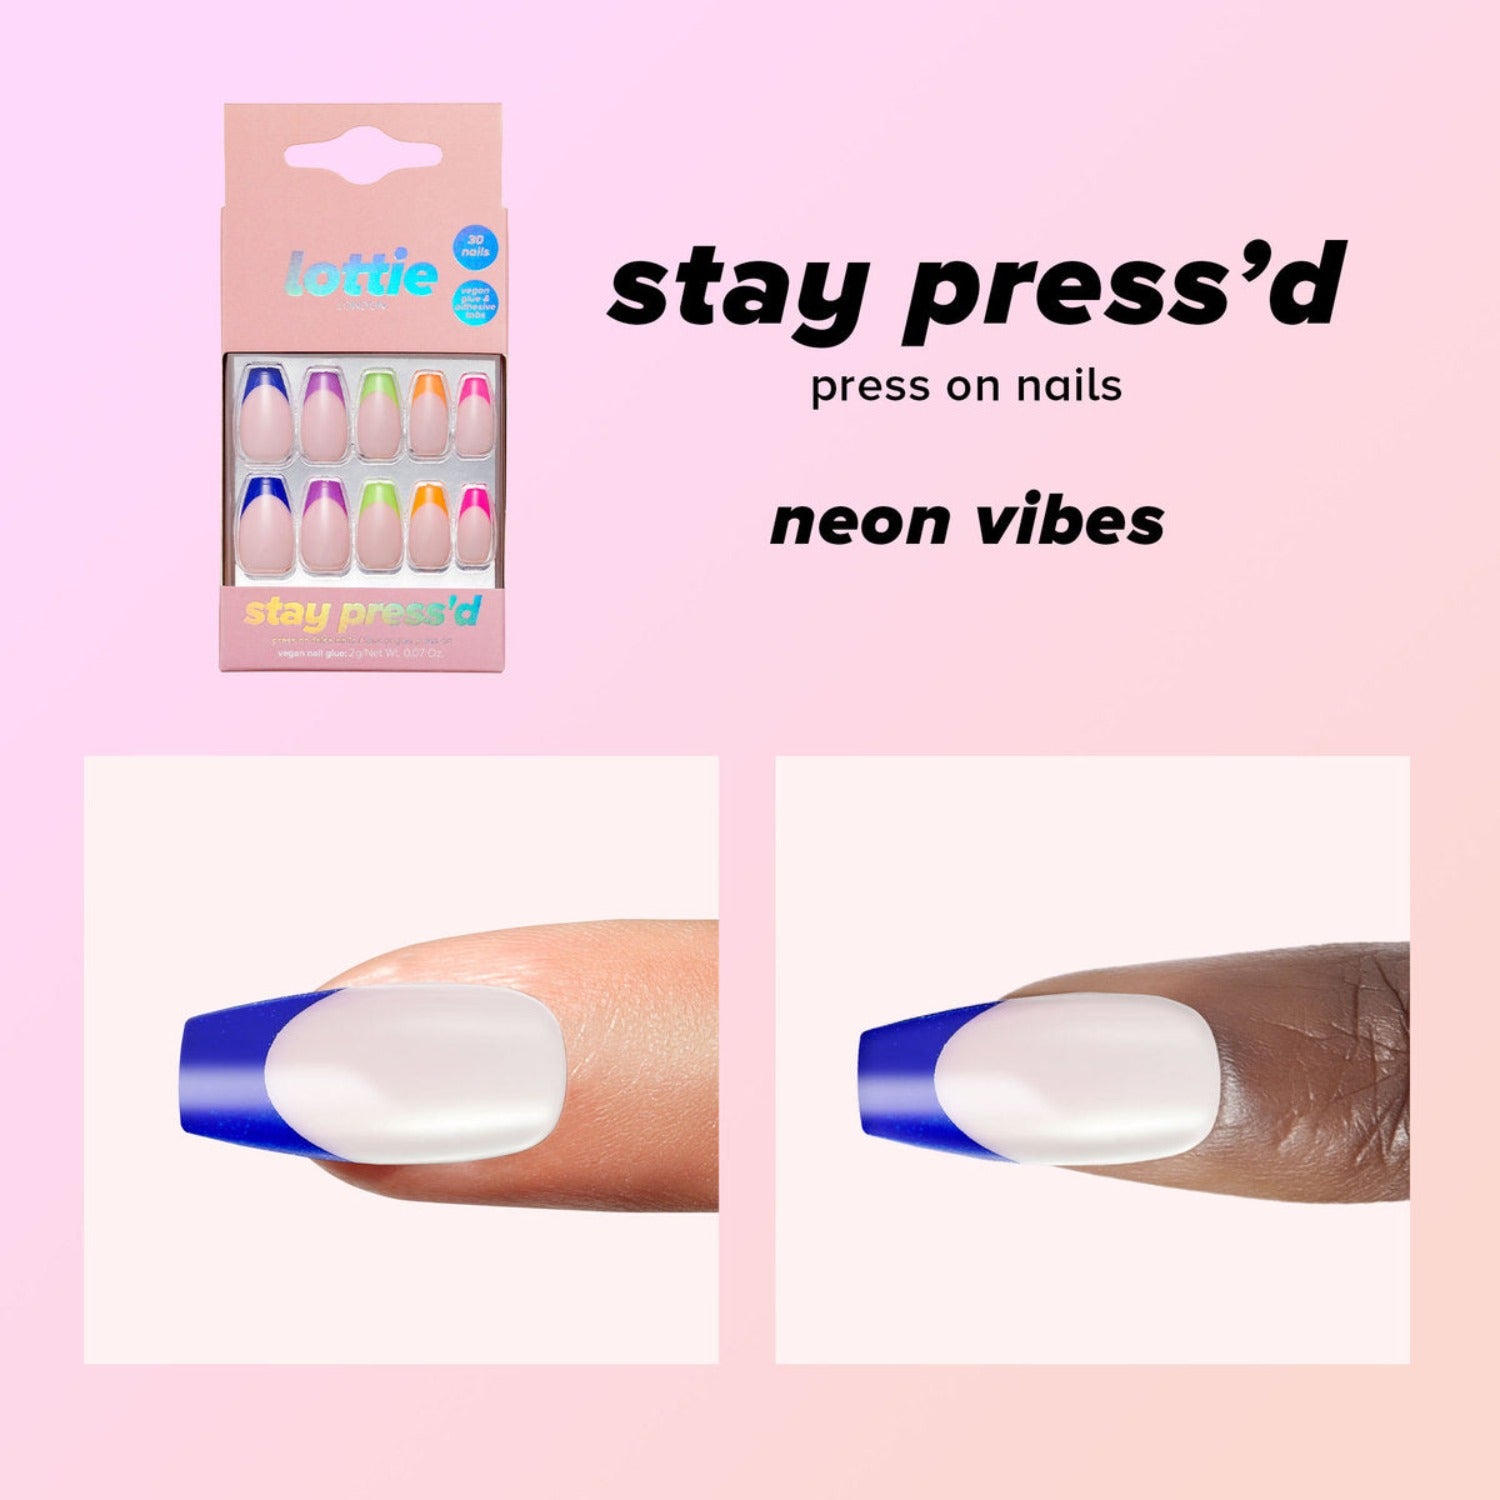 stay press'd - neon vibes